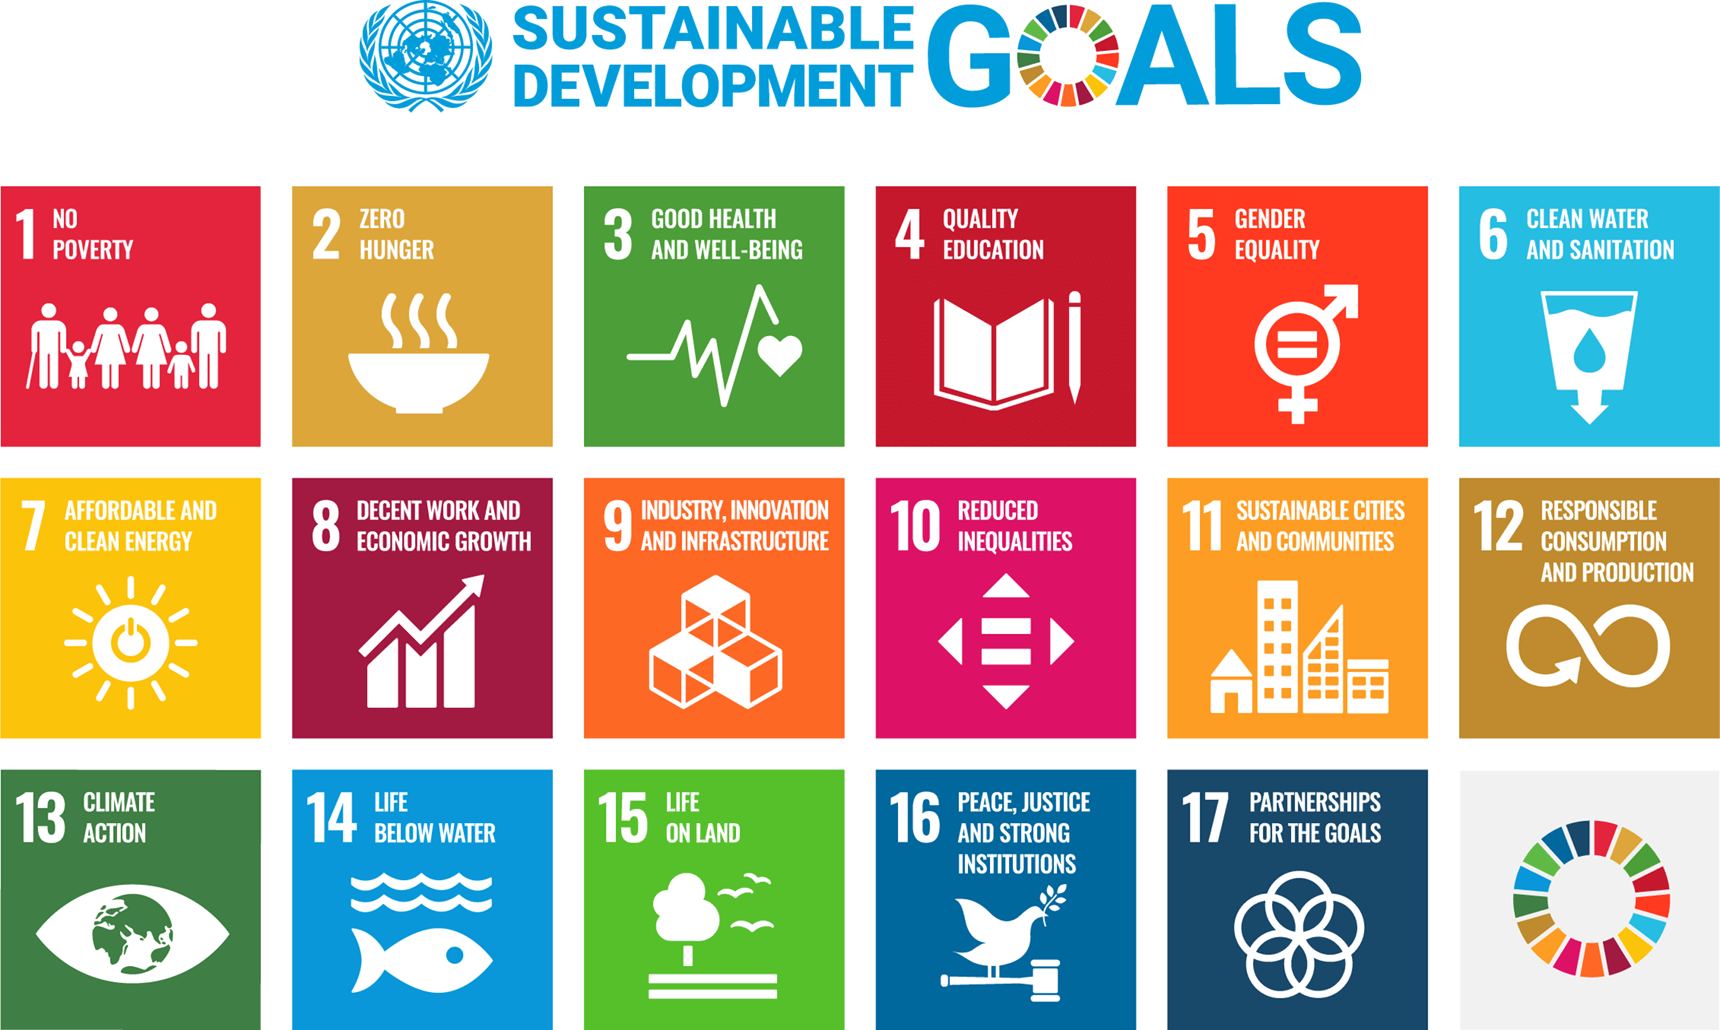 17 GOALS TO TRANSFORM OUR WORLD